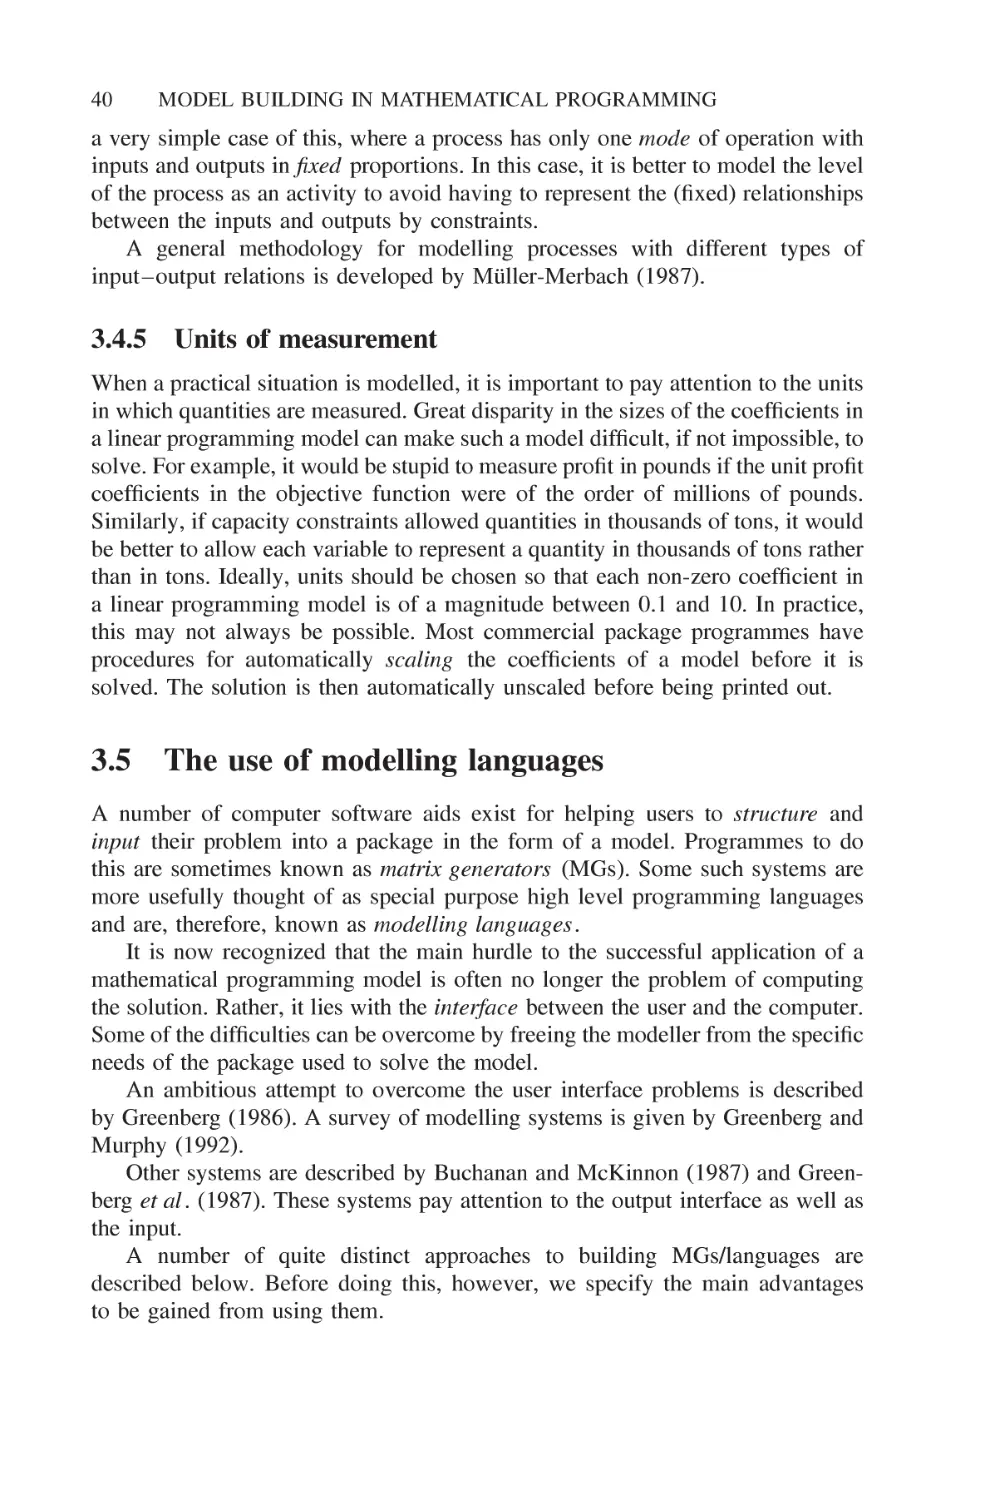 3.4.5 Units of measurement
3.5 The use of modelling languages